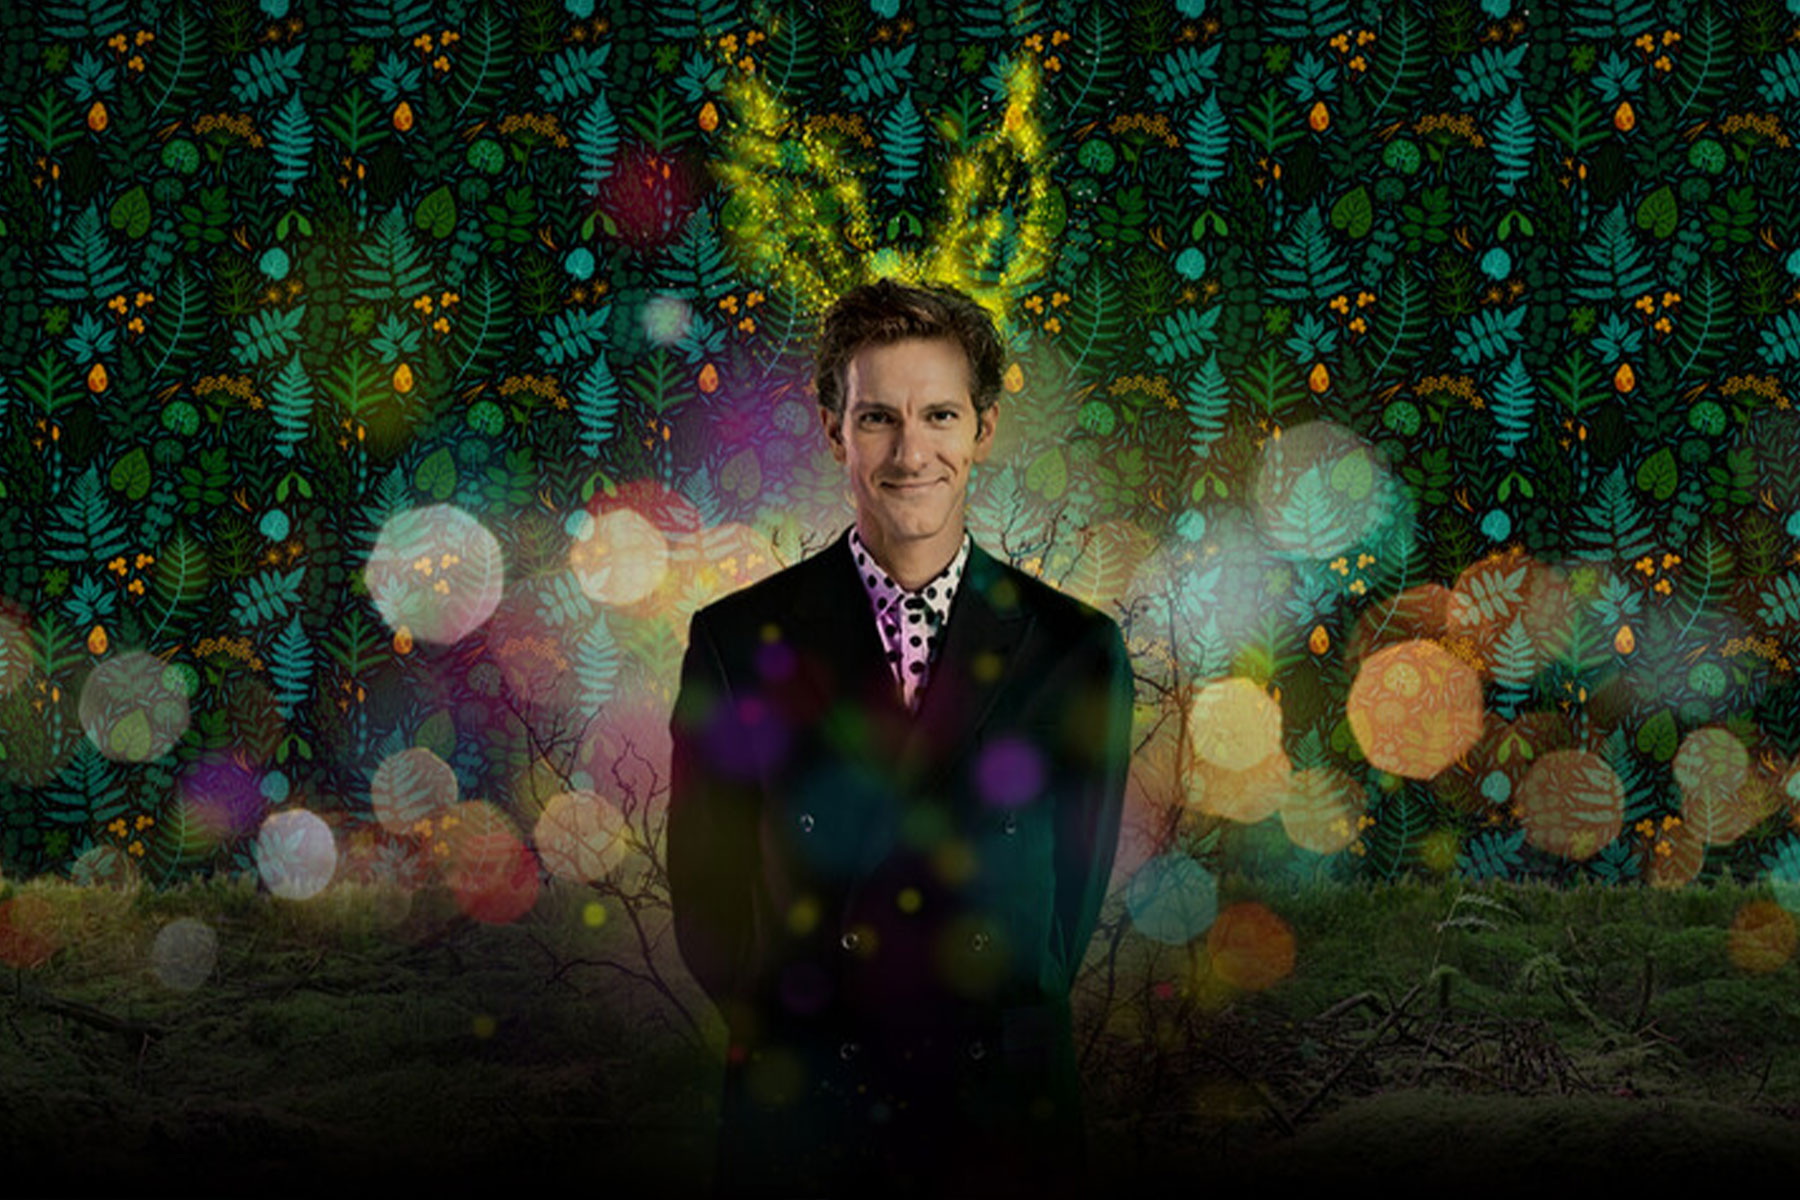 Mathew Baynton in a promotional image for A Midsummer Night's Dream